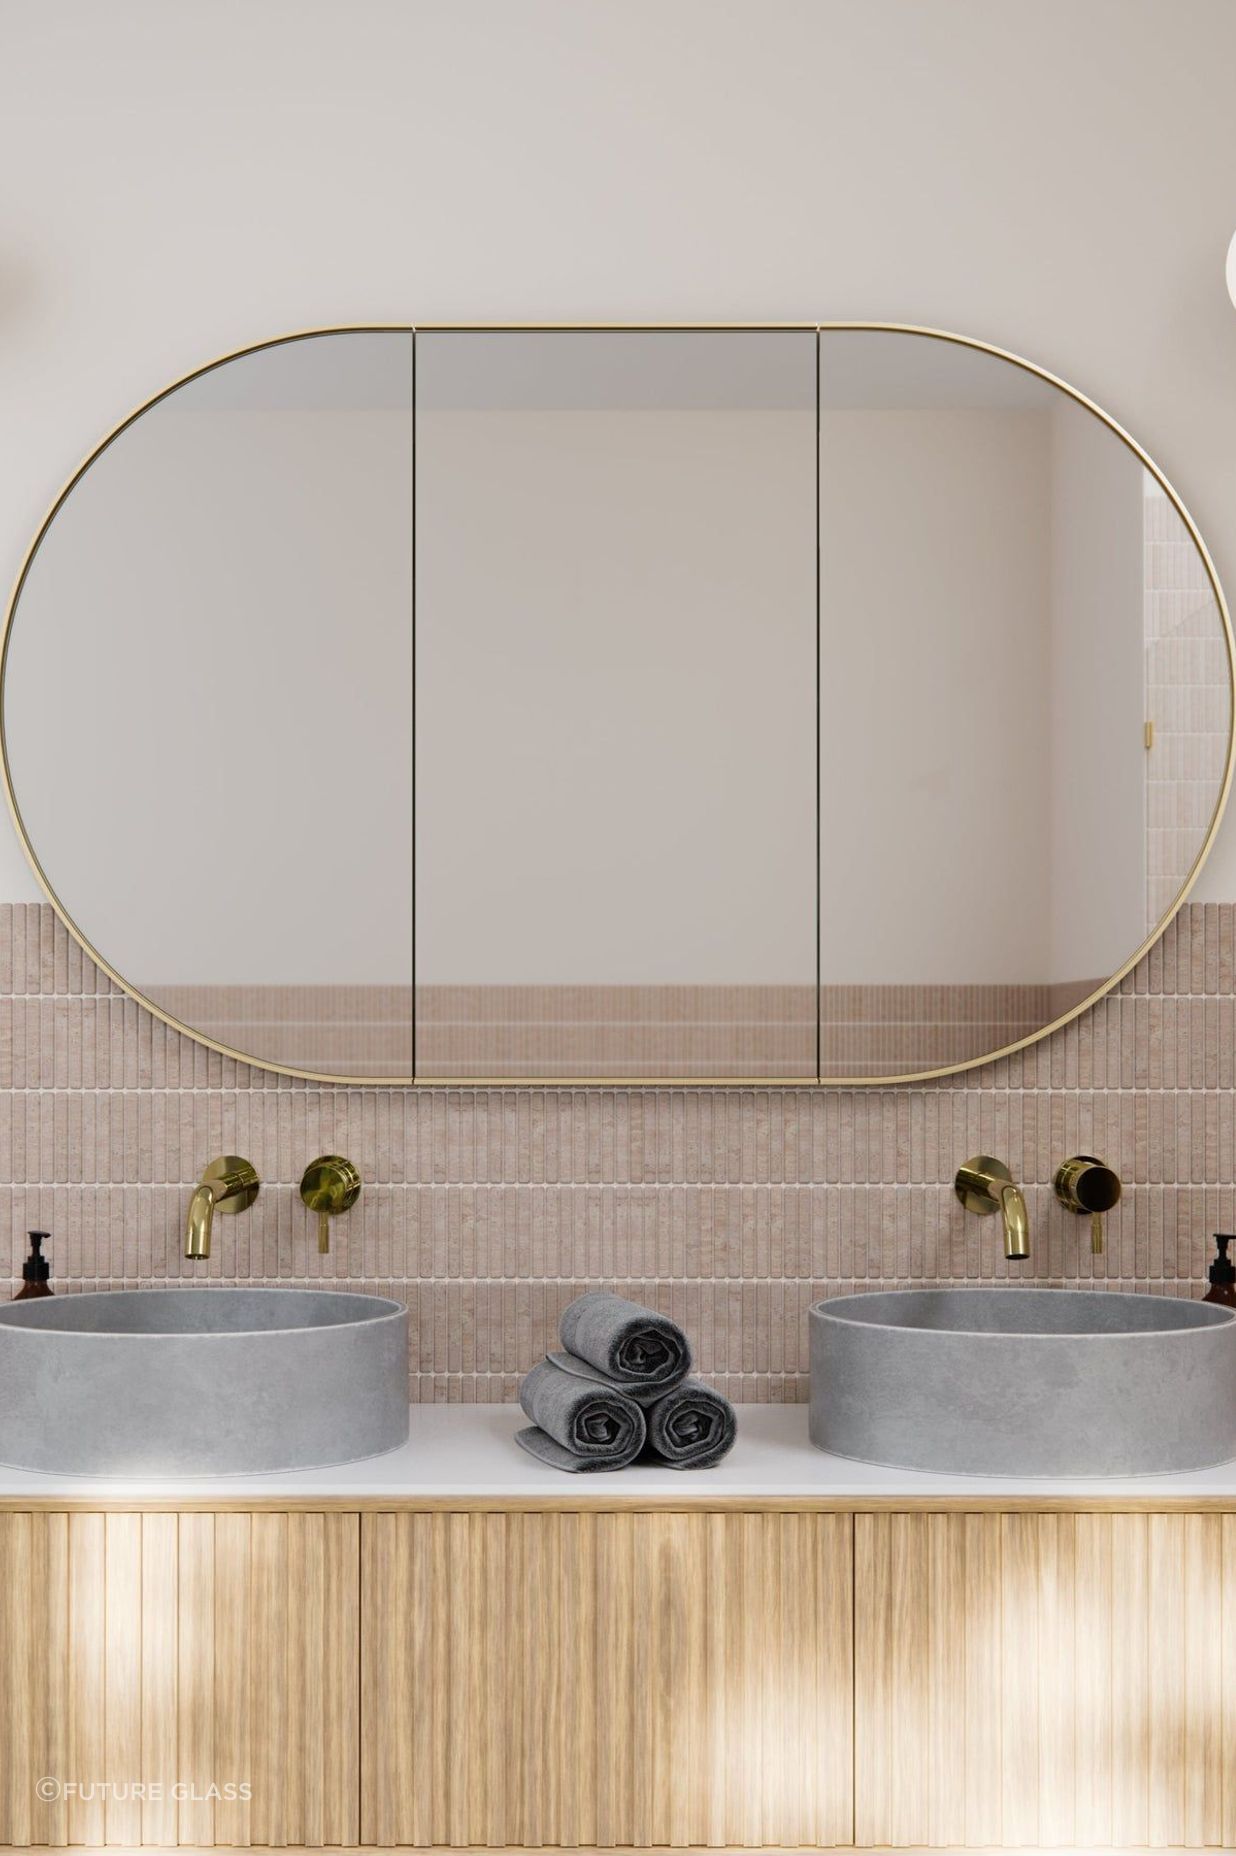 The brass satin frame matches the material of the taps. Featured product: Pill Mirror Cabinet